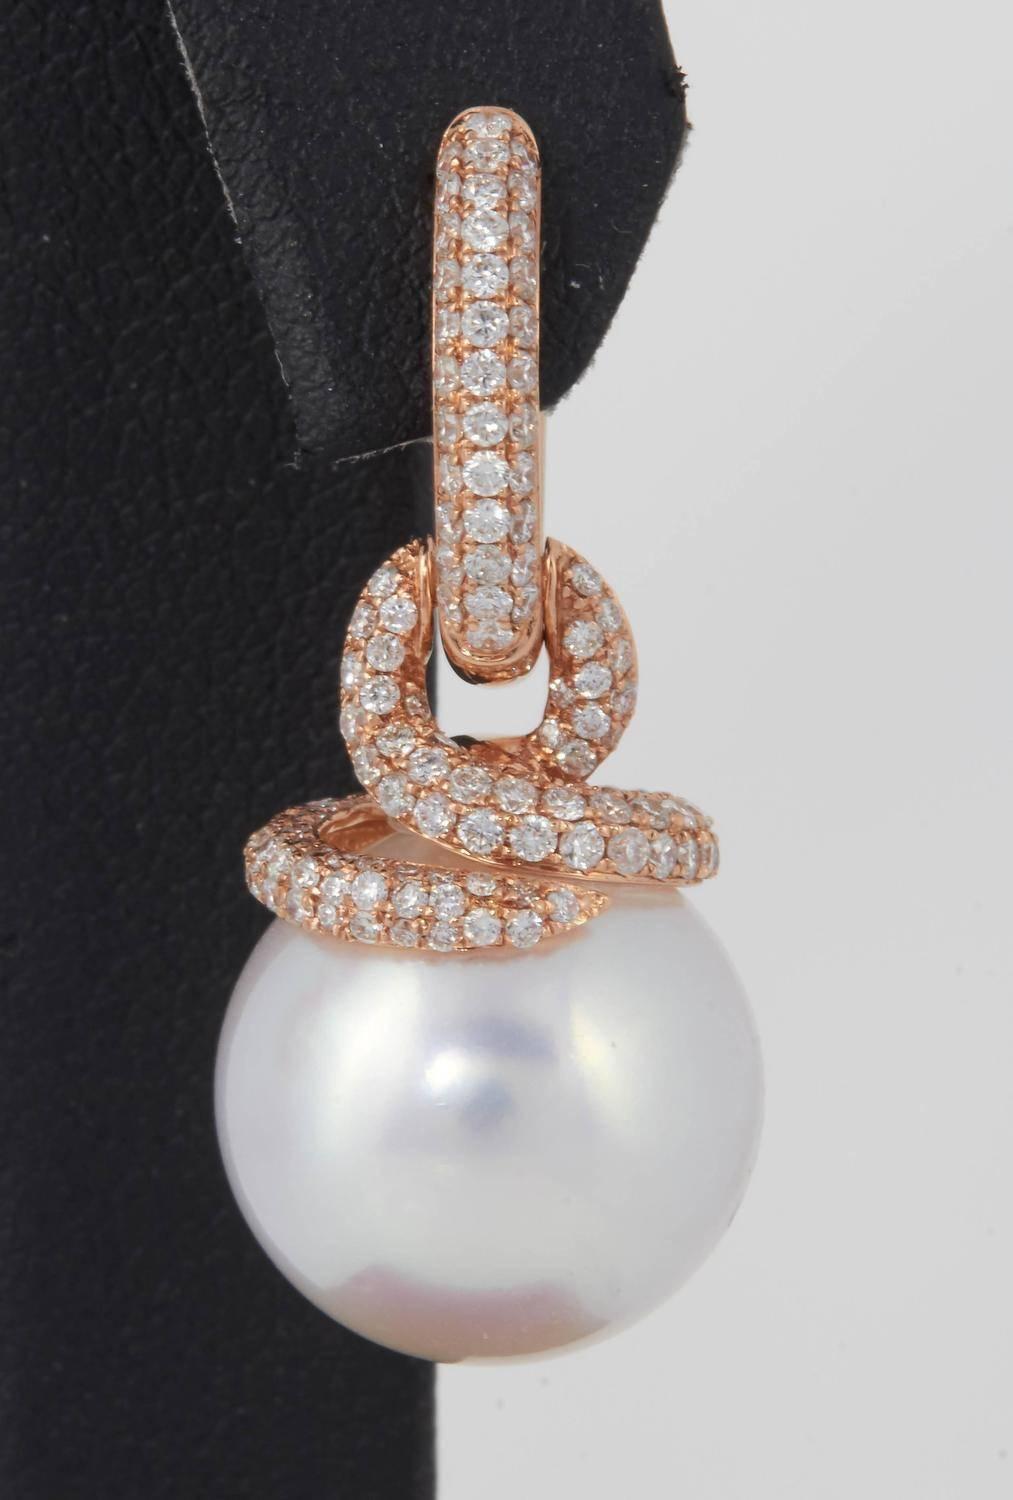 Gold ; 18k Rose Gold
Pearl: South Sea Pearl
Pearl Size; 14-15 mm
Pearl Quality: AA
Diamond Weight; 1.55 Cts.
Gold Weight: 5.5 g